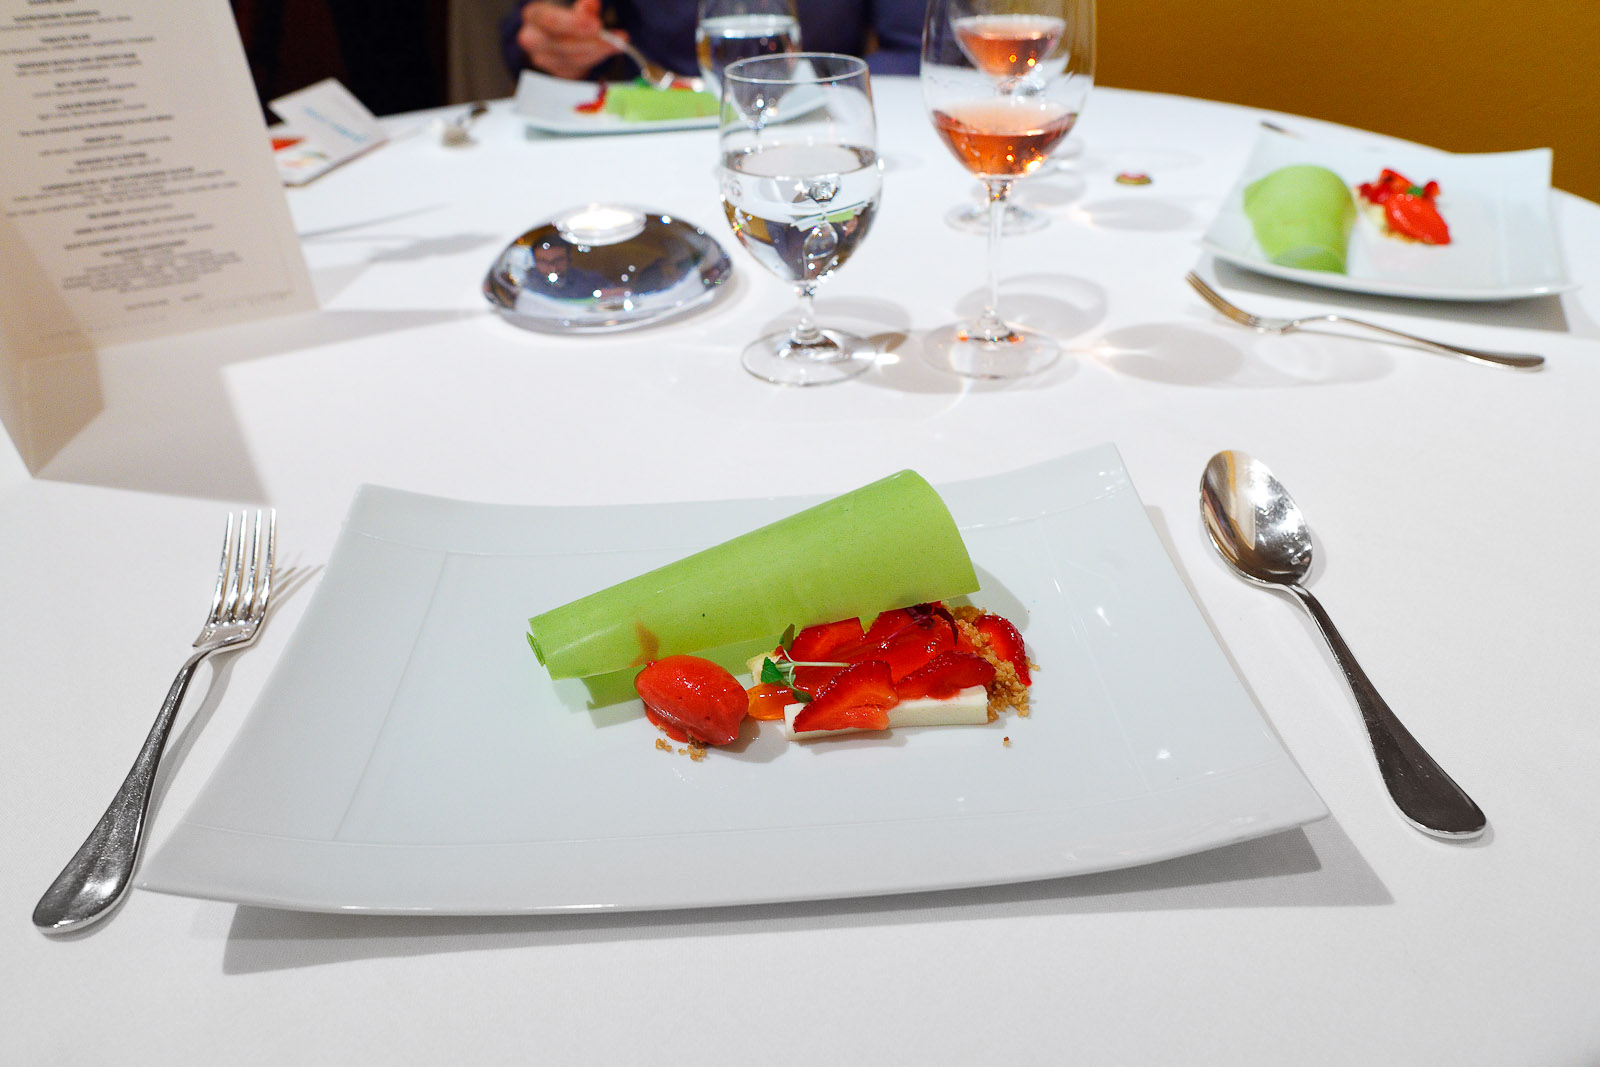 9th Course: Under a green roof tile, with strawberries